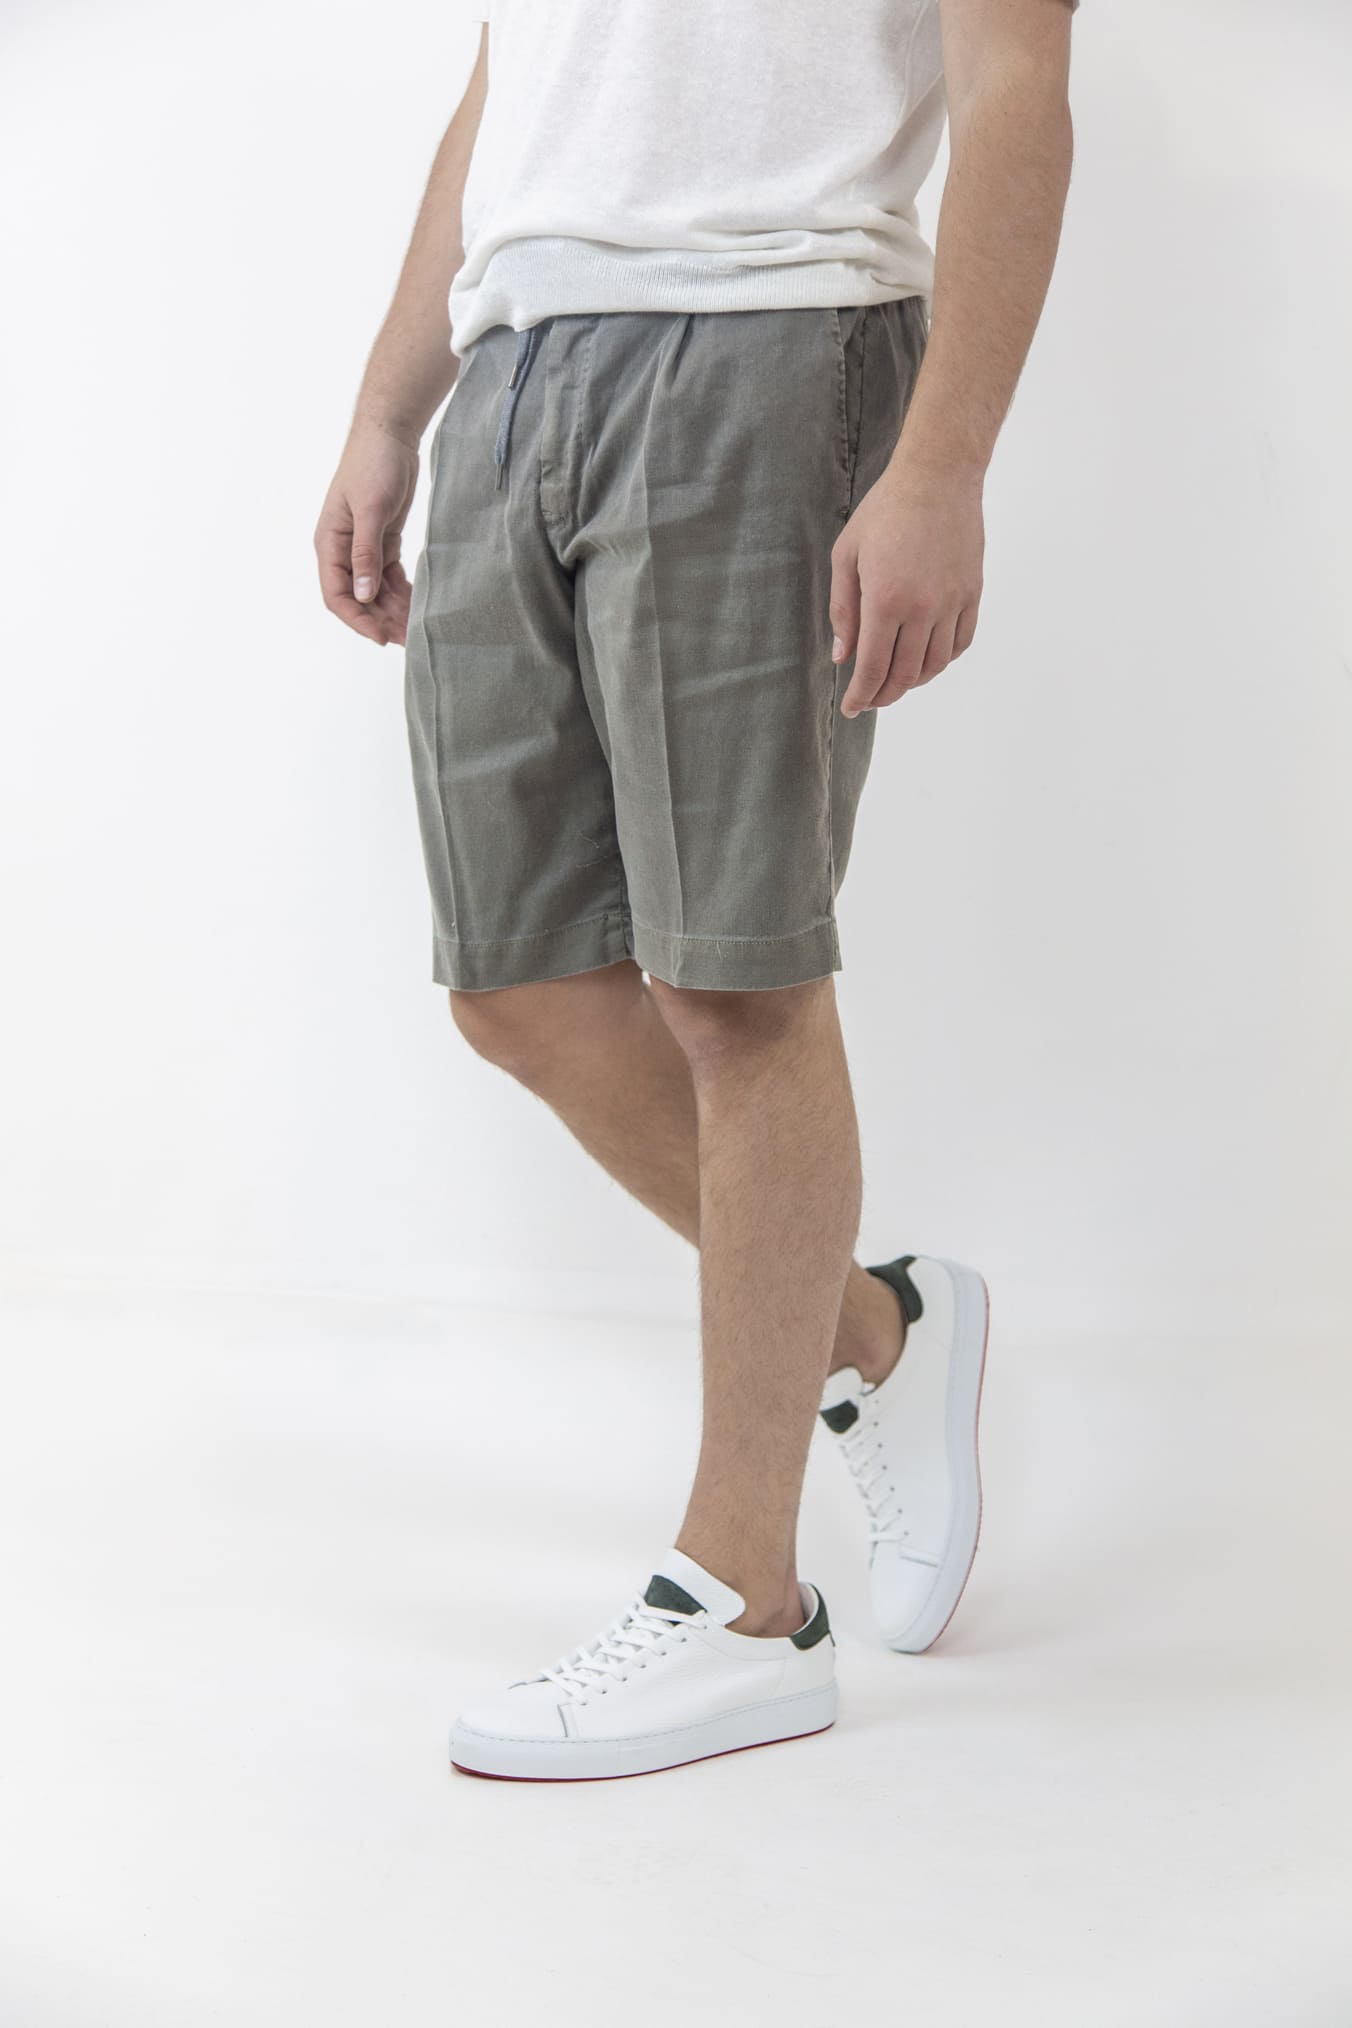 PT Bermuda shorts with pleats and removable drawstring in gray linen and cotton